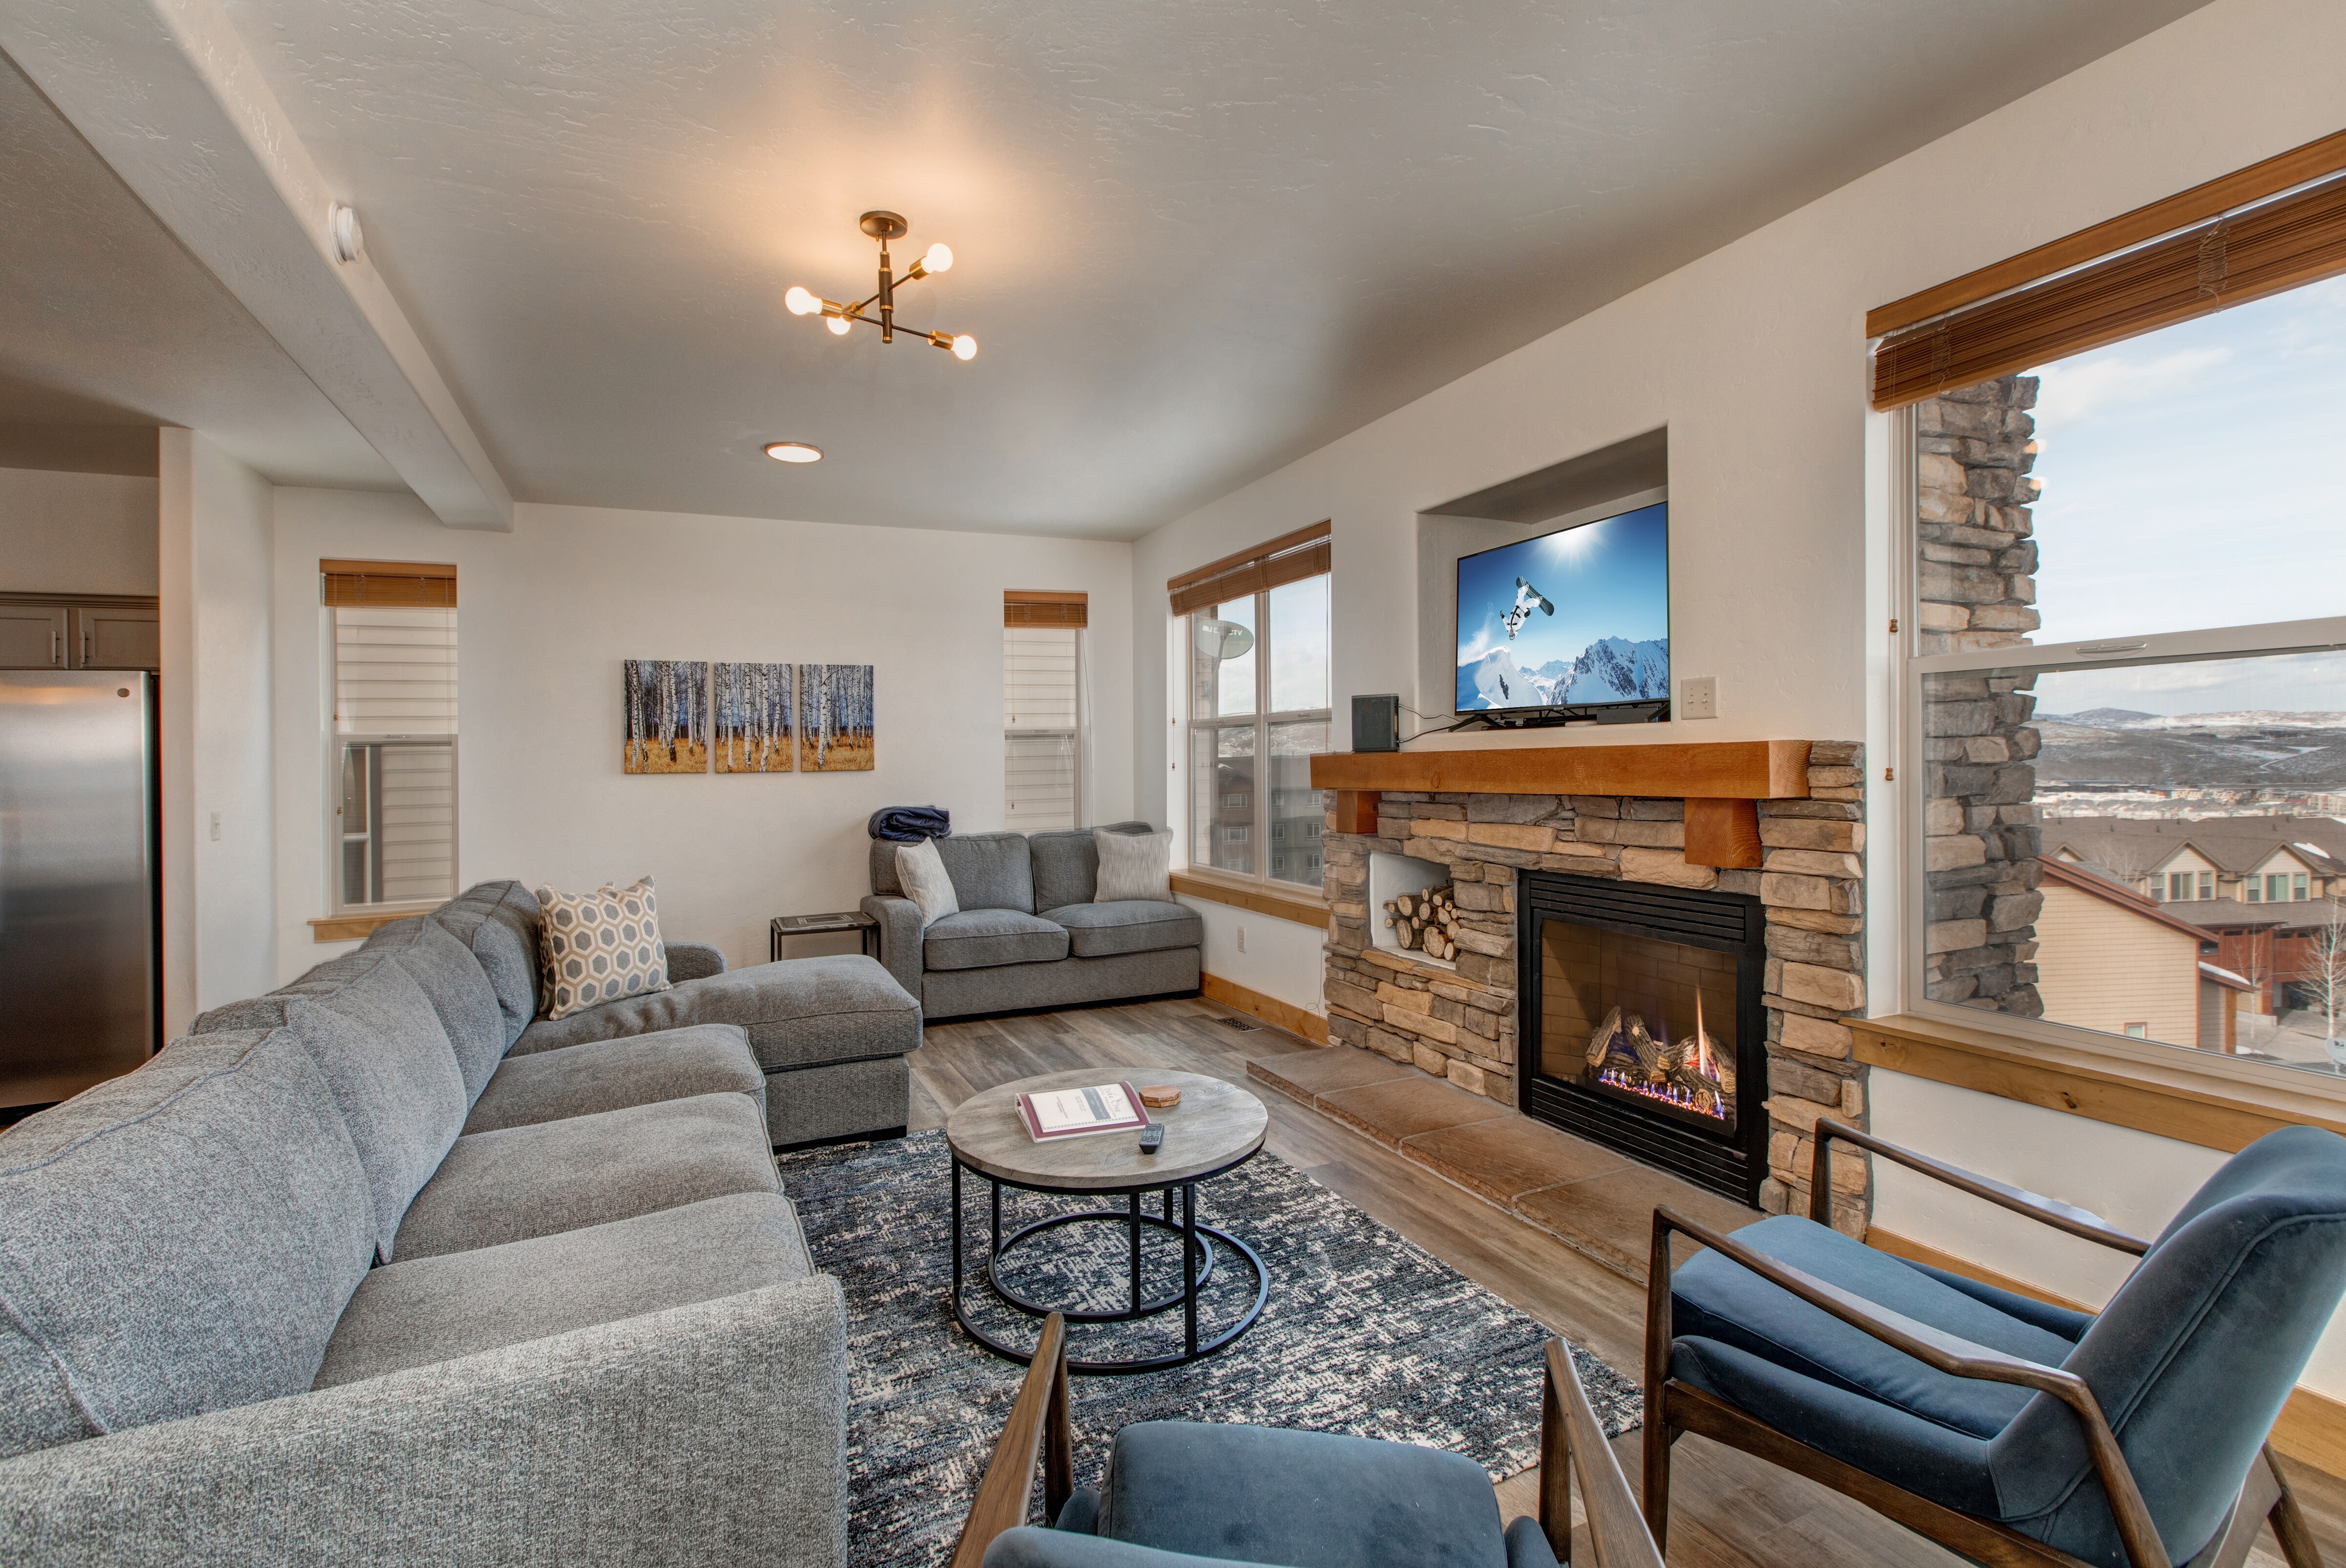 Main Level Living room with ample seating throughout the large sectional sofa, plush loveseat and two contemporary chairs. A gas fireplace, 50" Samsung smart tv, and private deck access make this the perfect room to gather and spend a night in